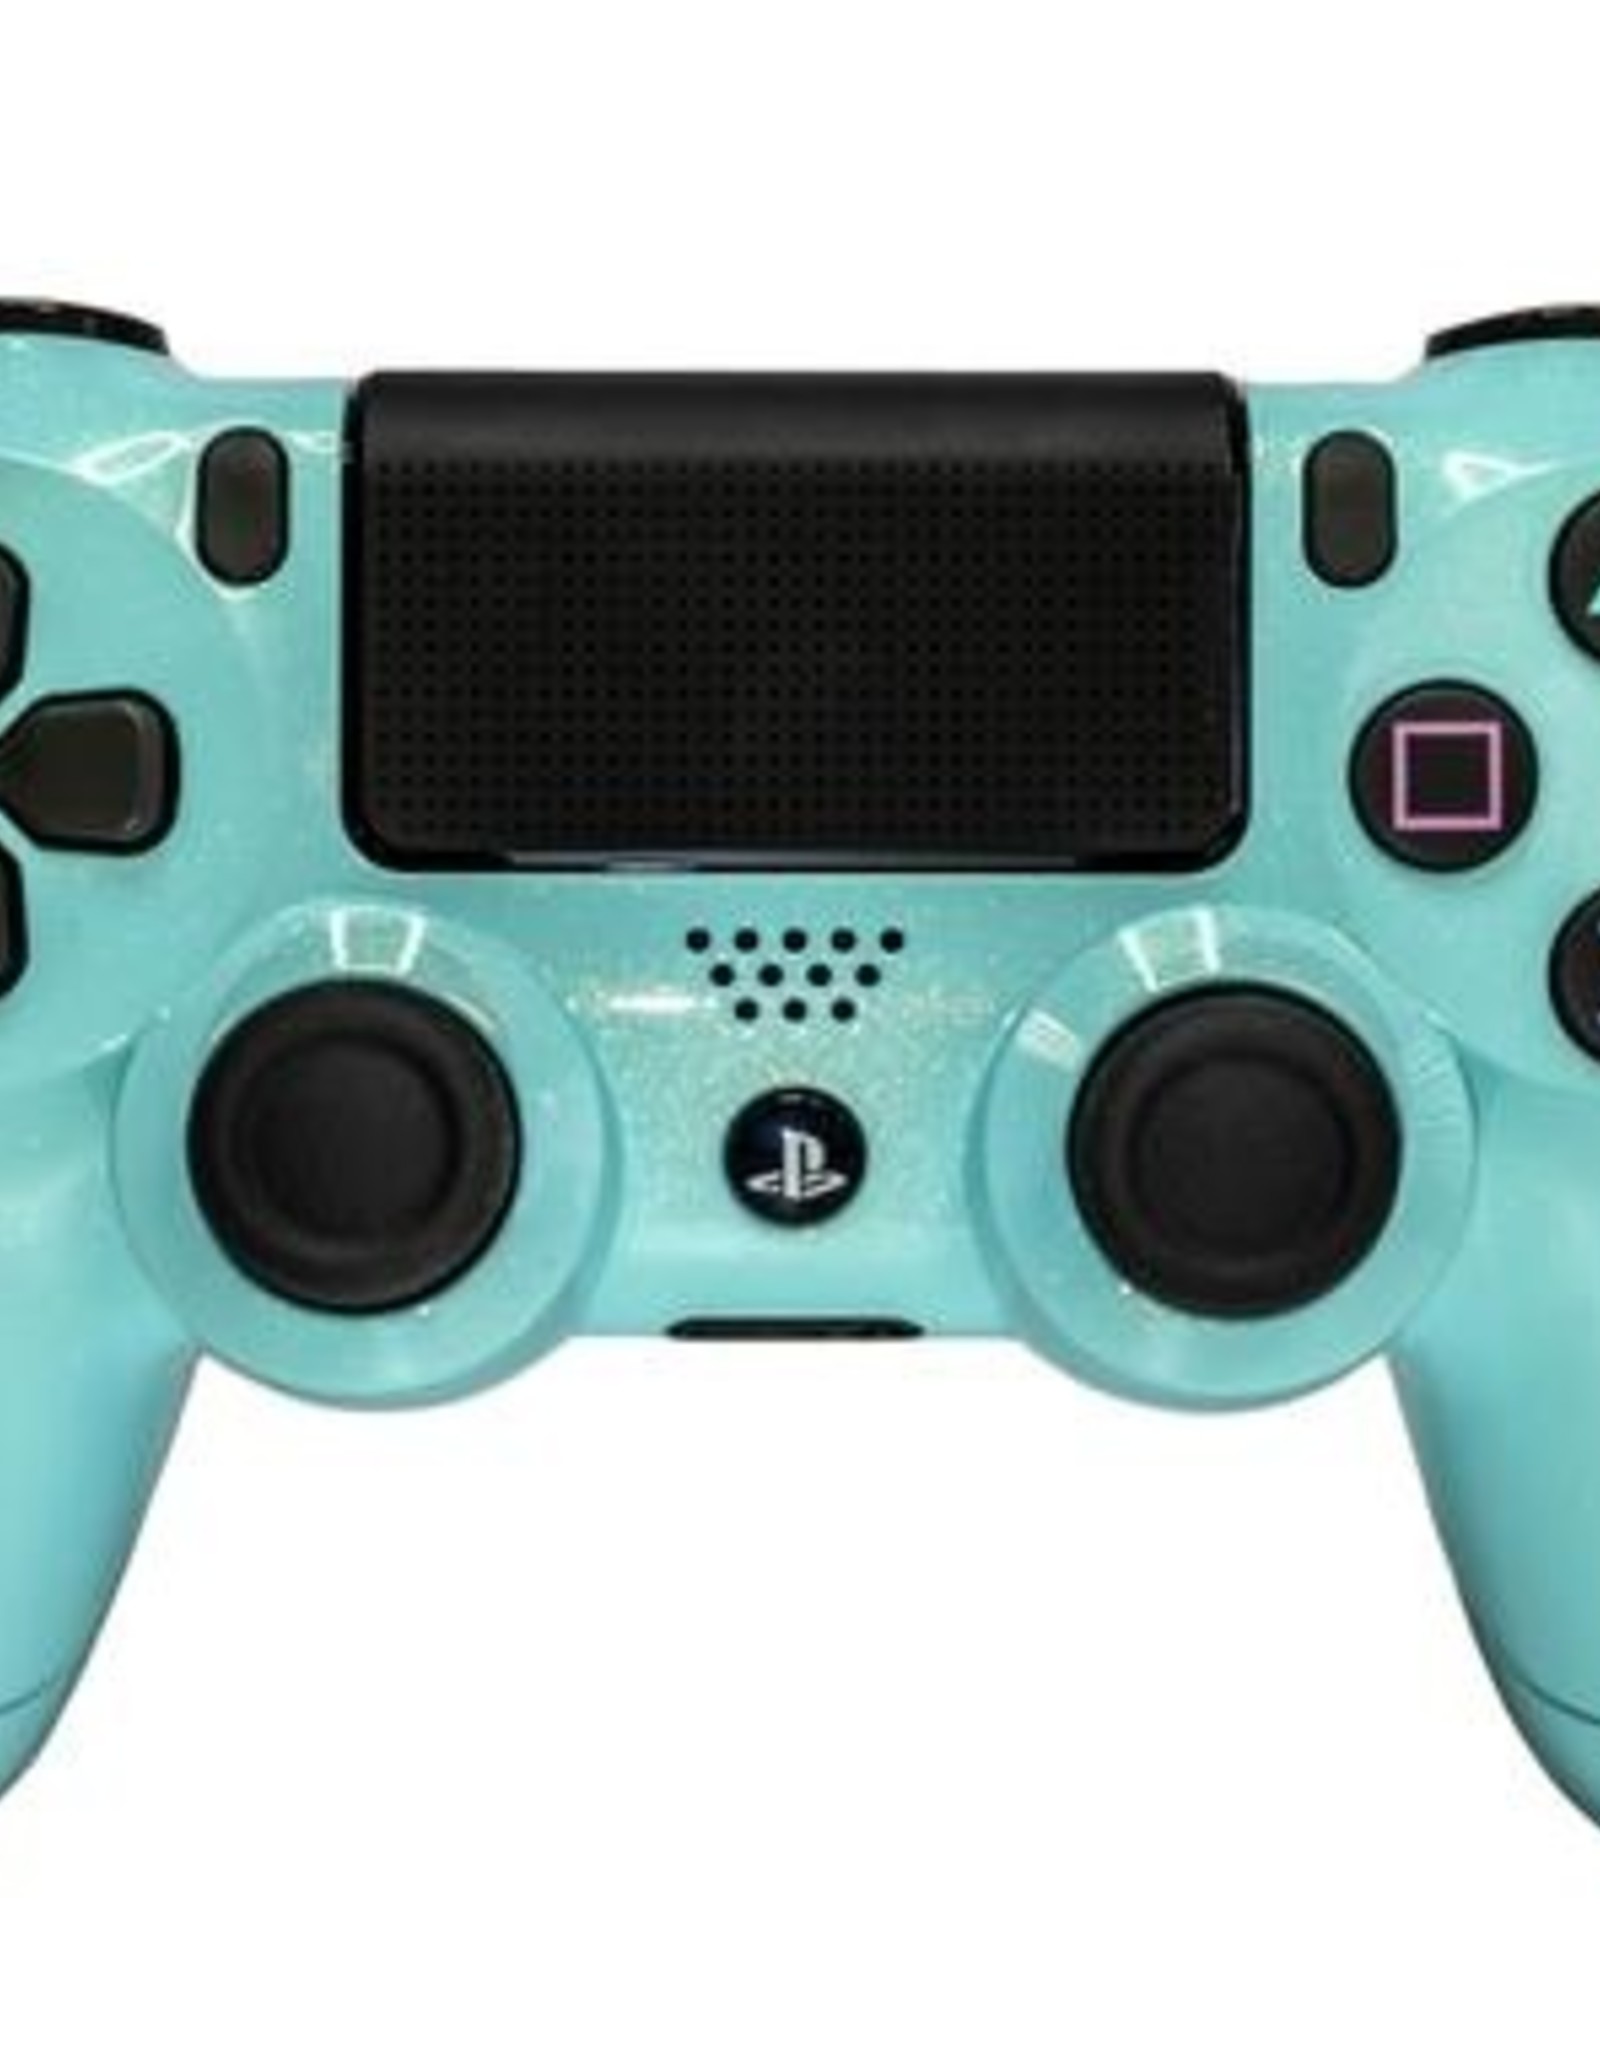 PlayStation DualShock 4 Wireless Controller for PlayStation 4***